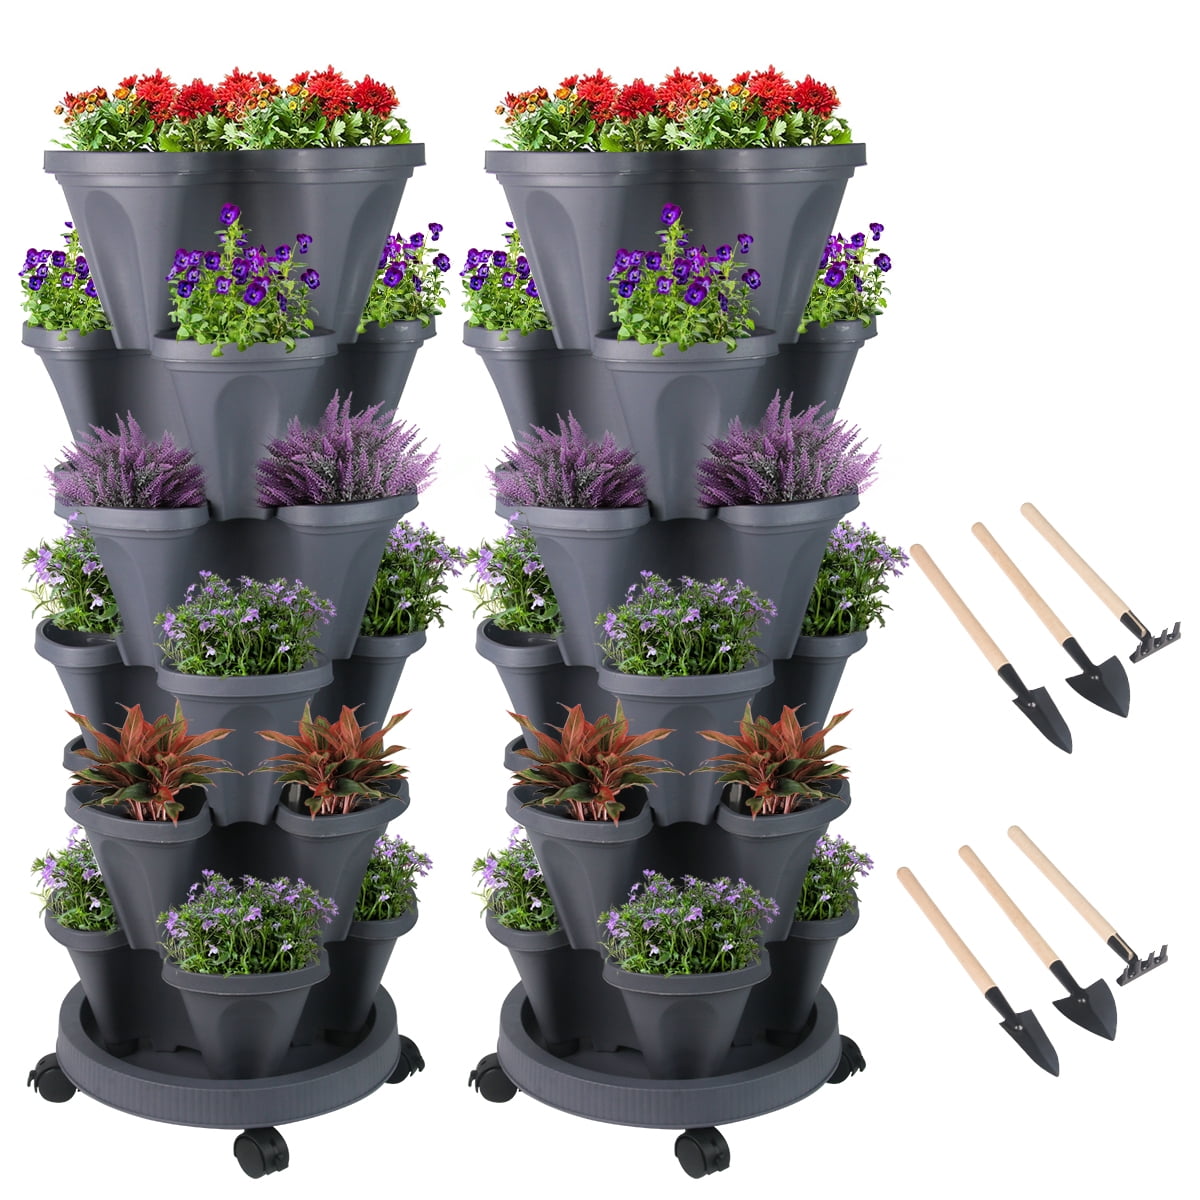 Aoodor Stackable Planter Vertical, Tower Garden Planters ，Growing System  for Indoor and Outdoor Use